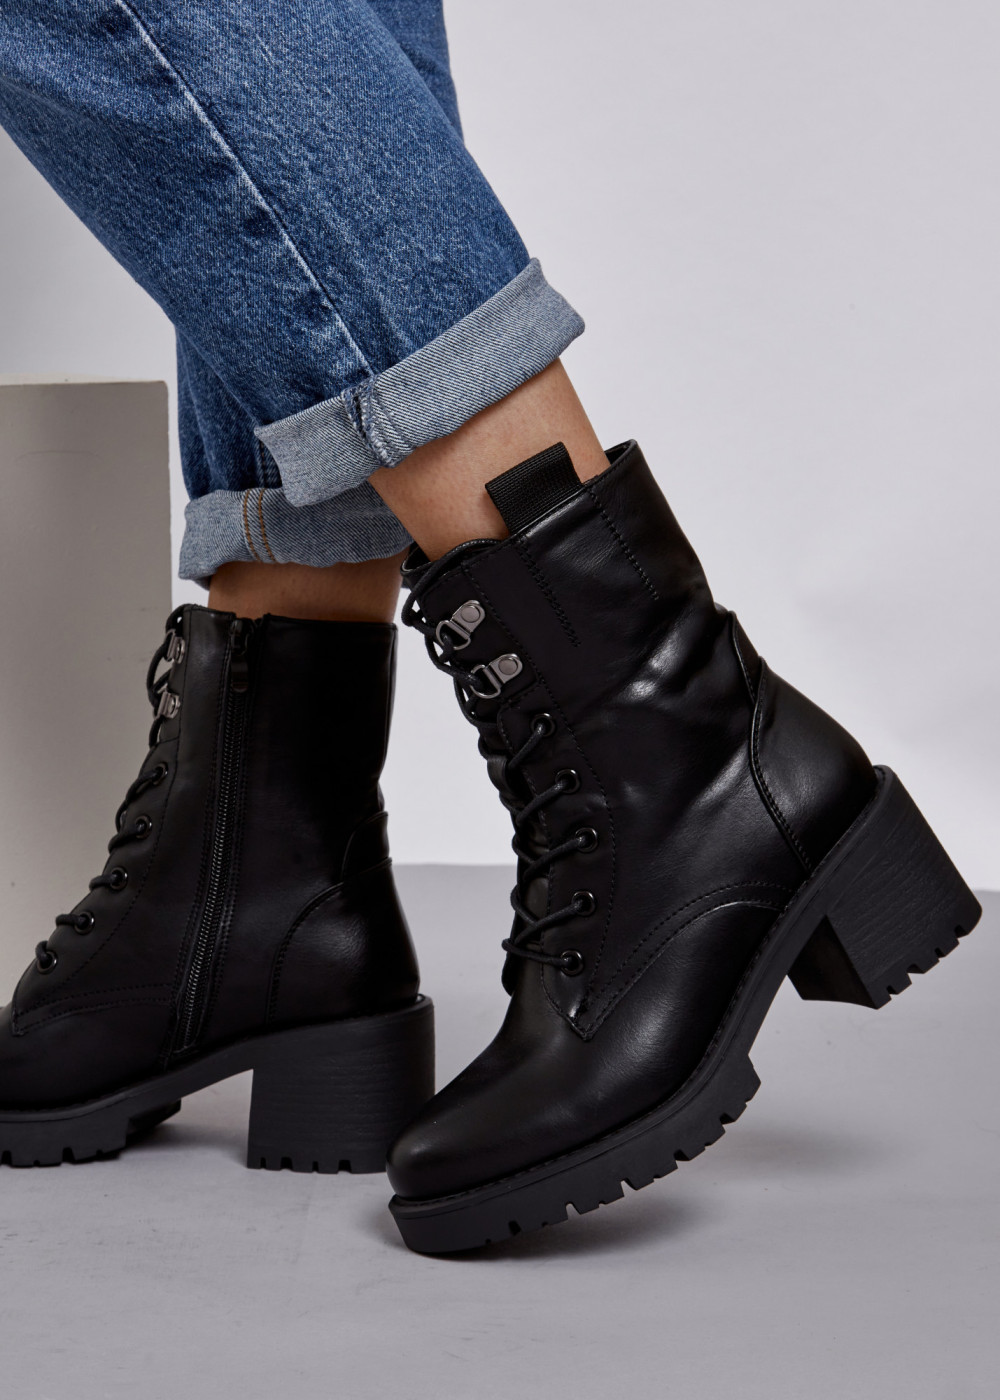 Black lace up heeled ankle boots 4